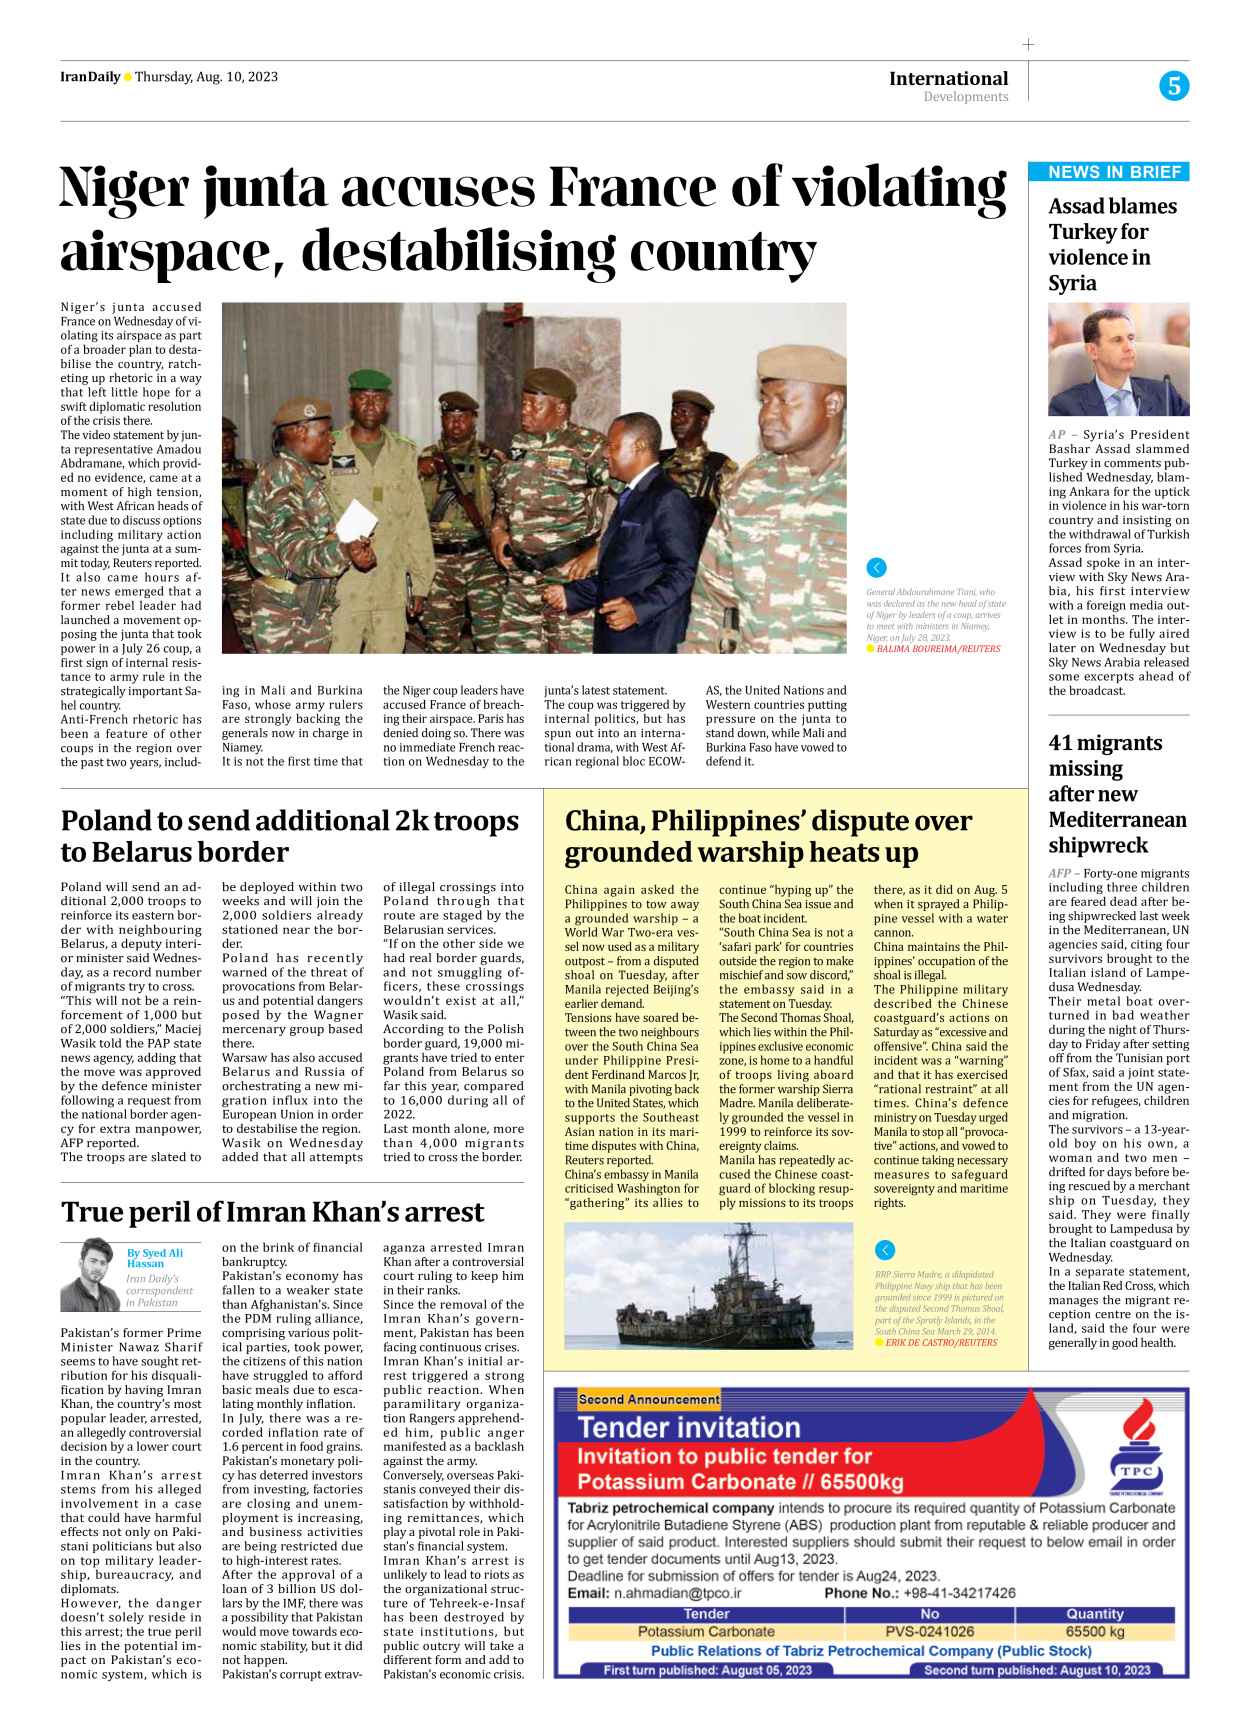 Iran Daily - Number Seven Thousand Three Hundred and Fifty Nine - 10 August 2023 - Page 5